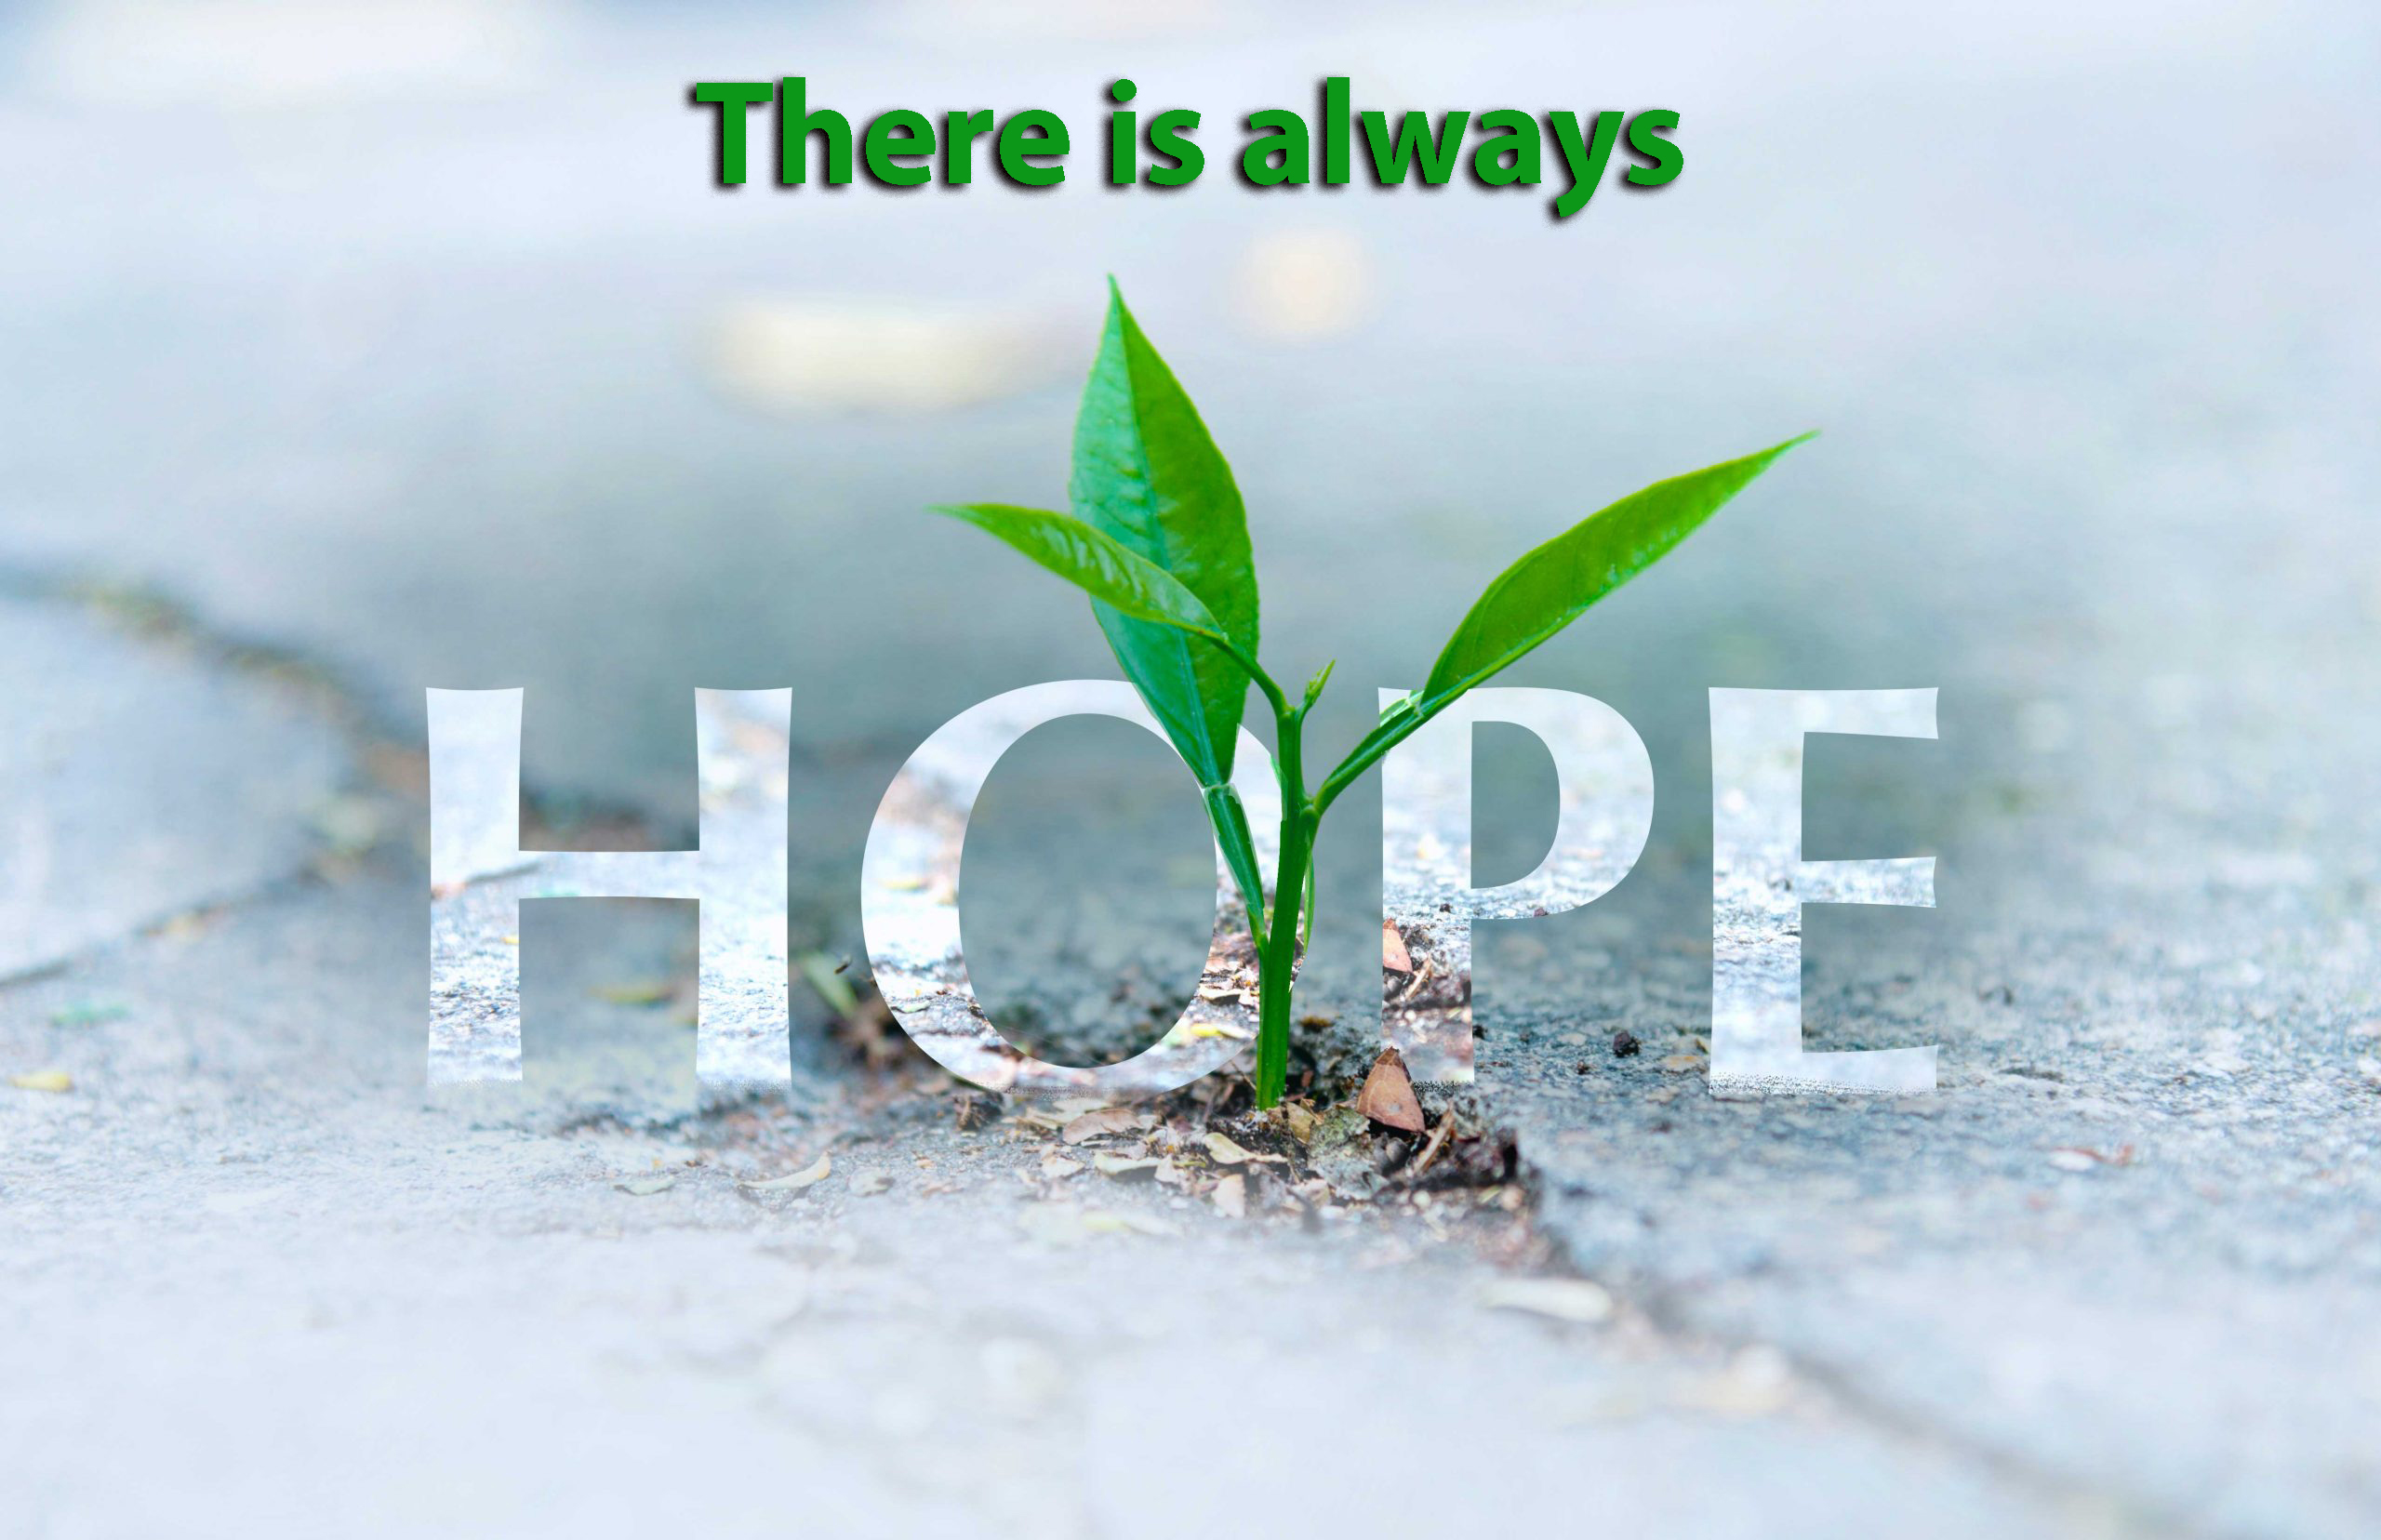 Is there any hope? There is always hope!